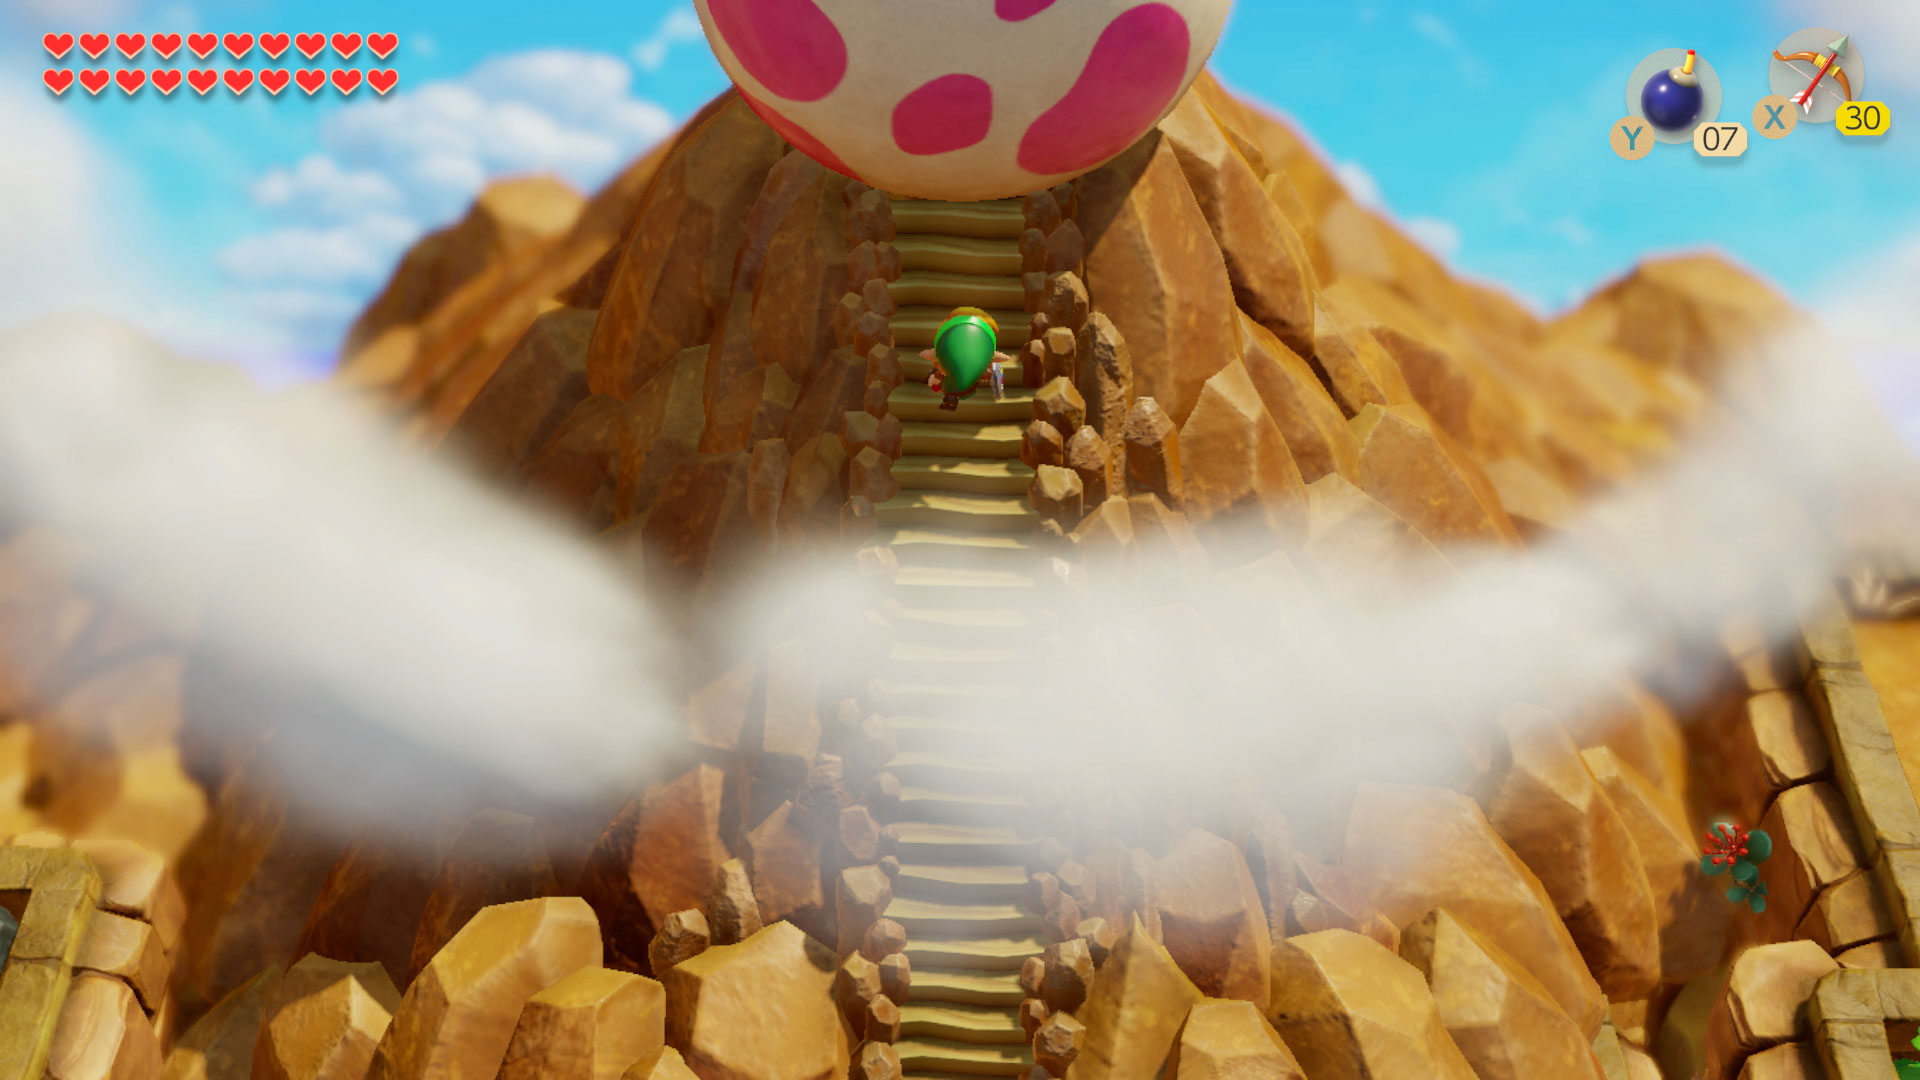 Climbing up mountain steps leading to the giant egg.